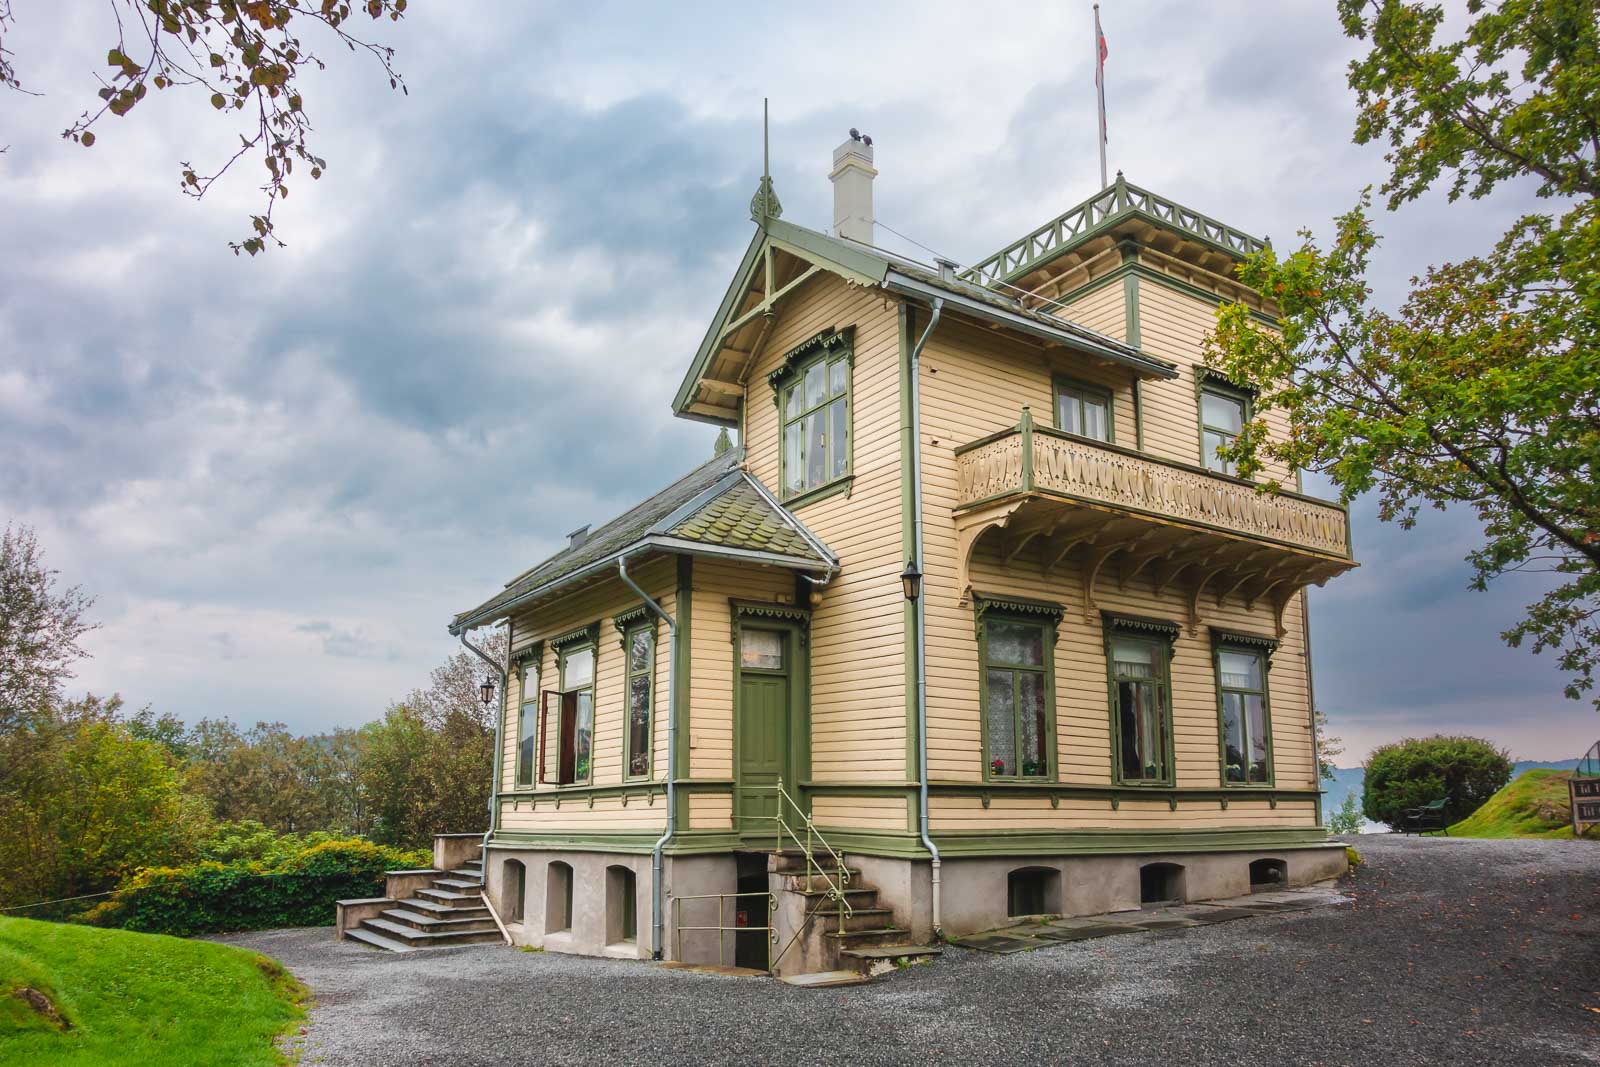 Things to do in Bergen Edvard Grieg Museum